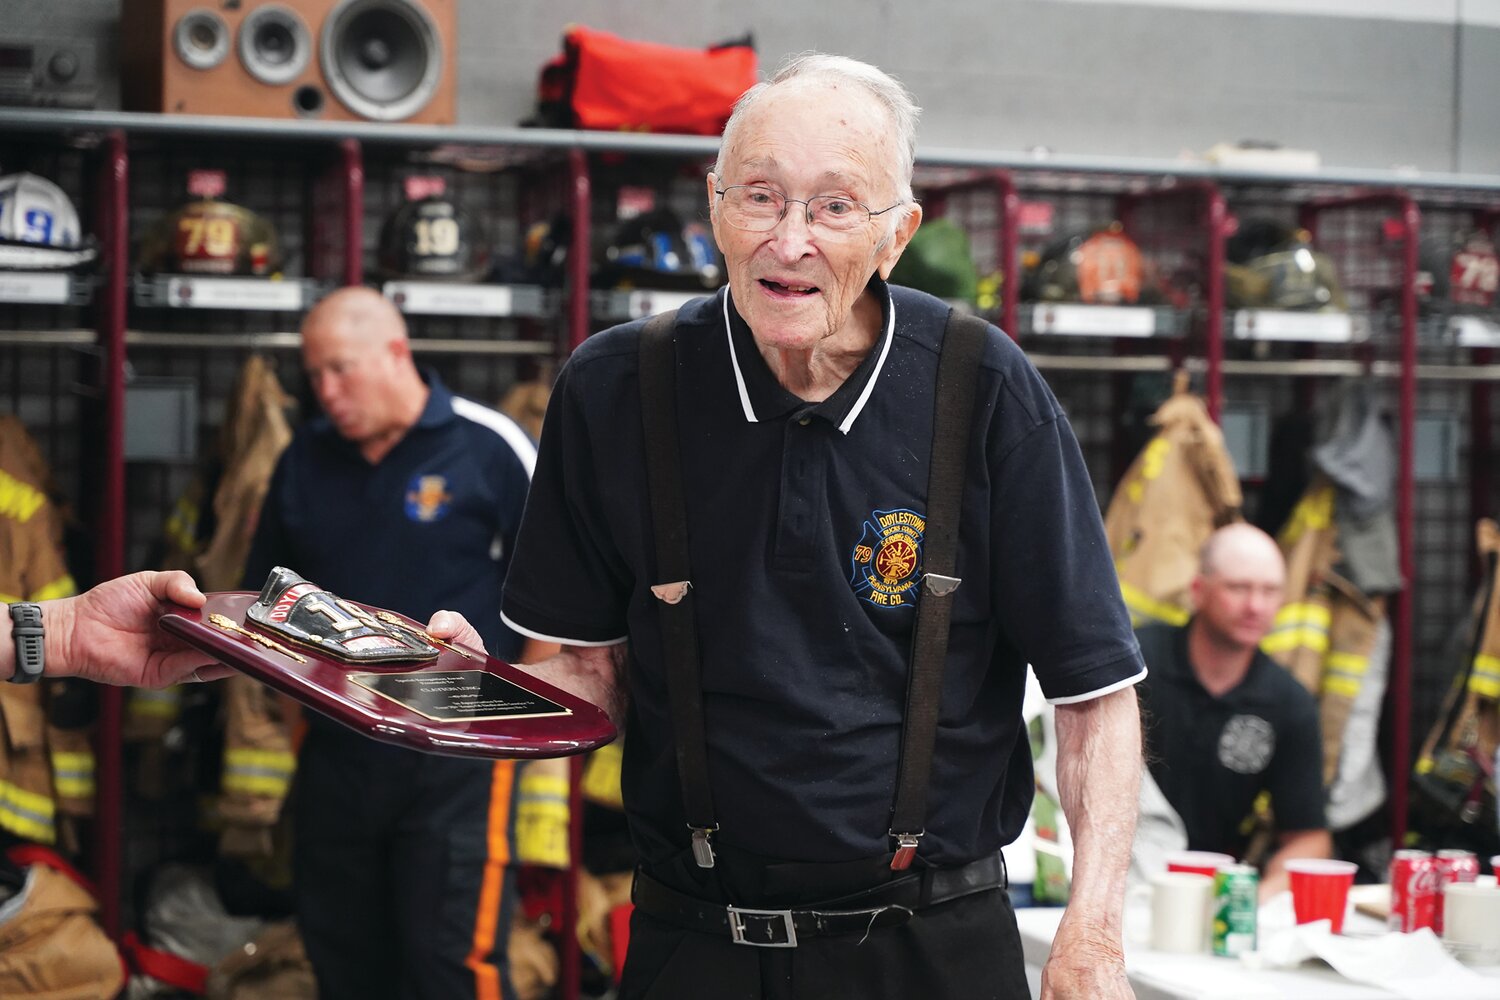 Life member of the Doylestown Fire Co. #1 Clayton Long accepts a plaque, given in appreciation for his 70  years of service to the company at its June 7 “Old Timers Night.”